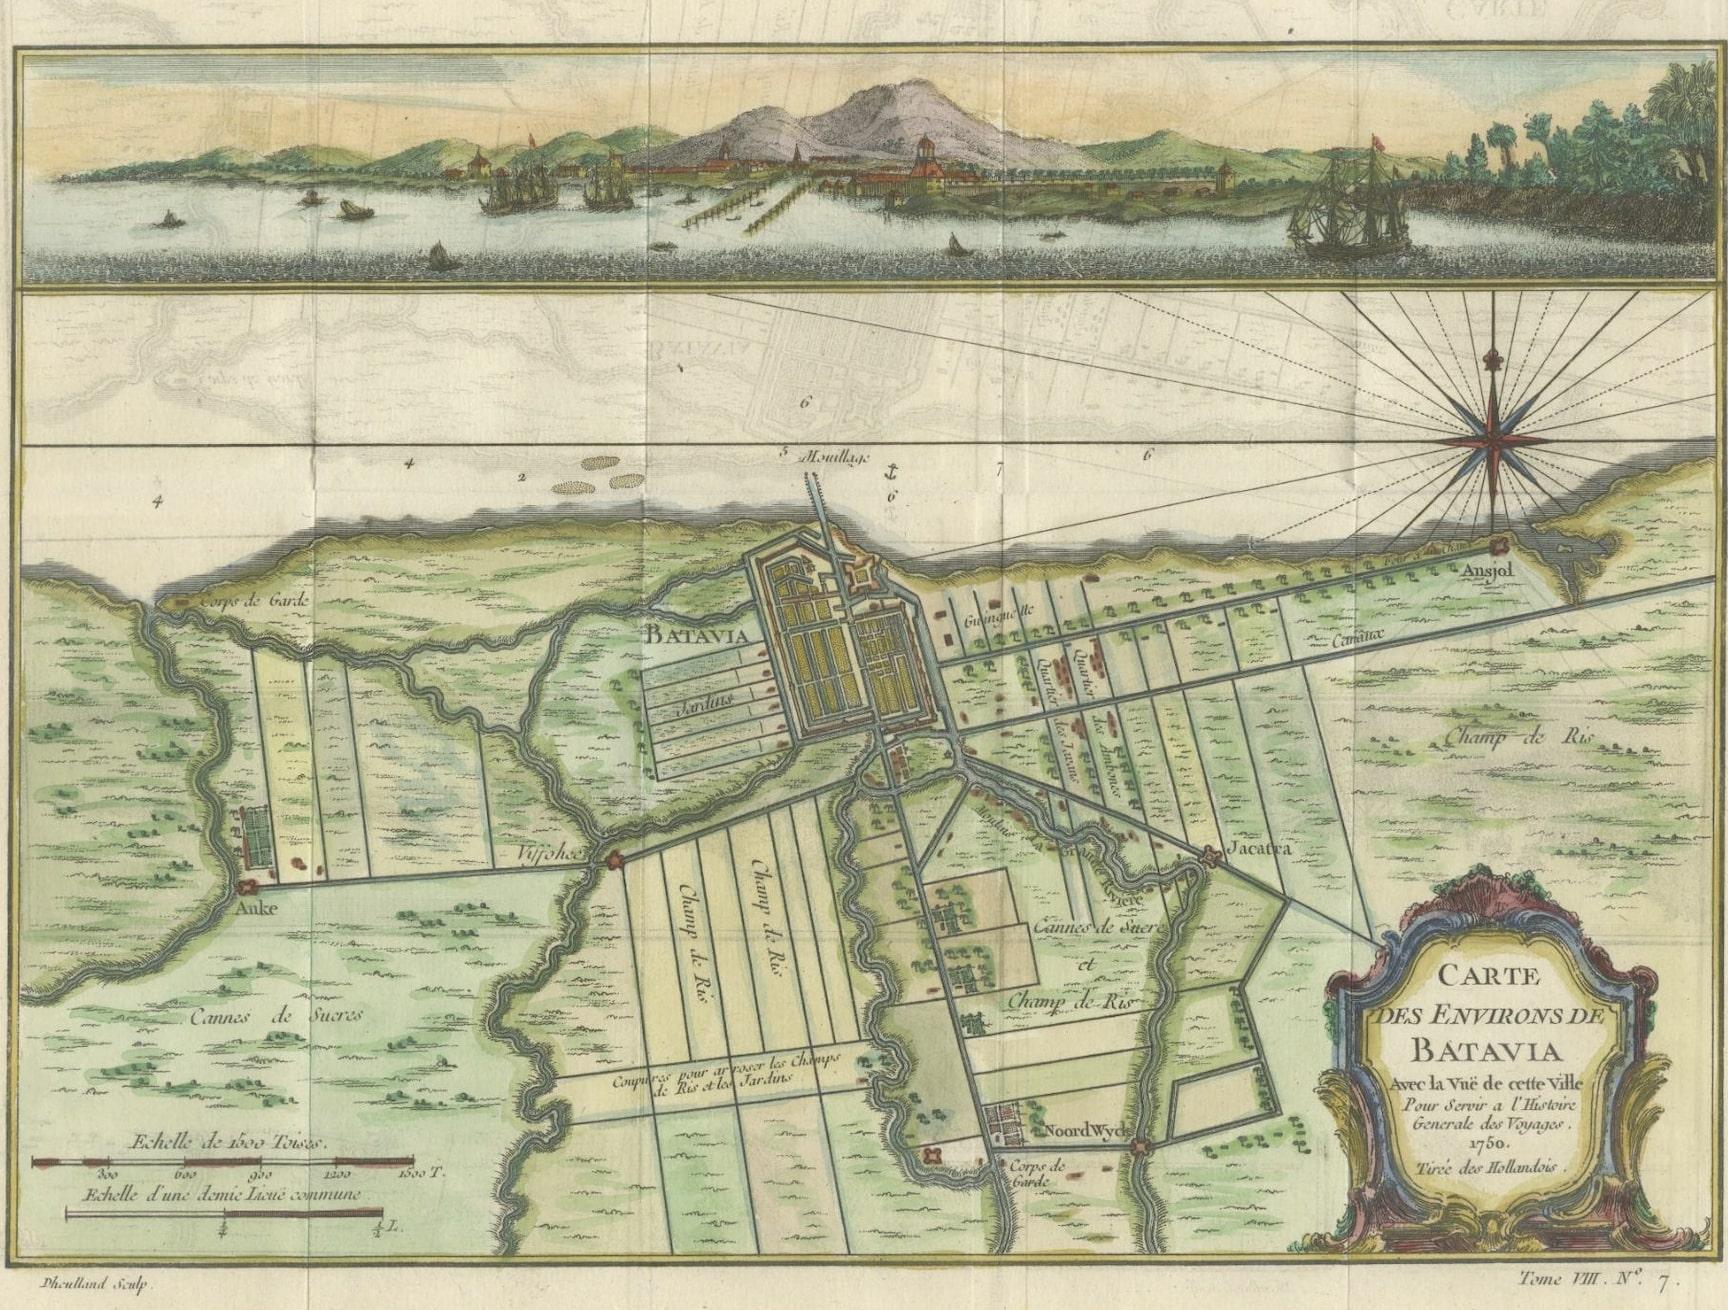 Engraved Batavia in Bloom: A 1750 Hand-Colored Engraving of a Cartographic Treasure